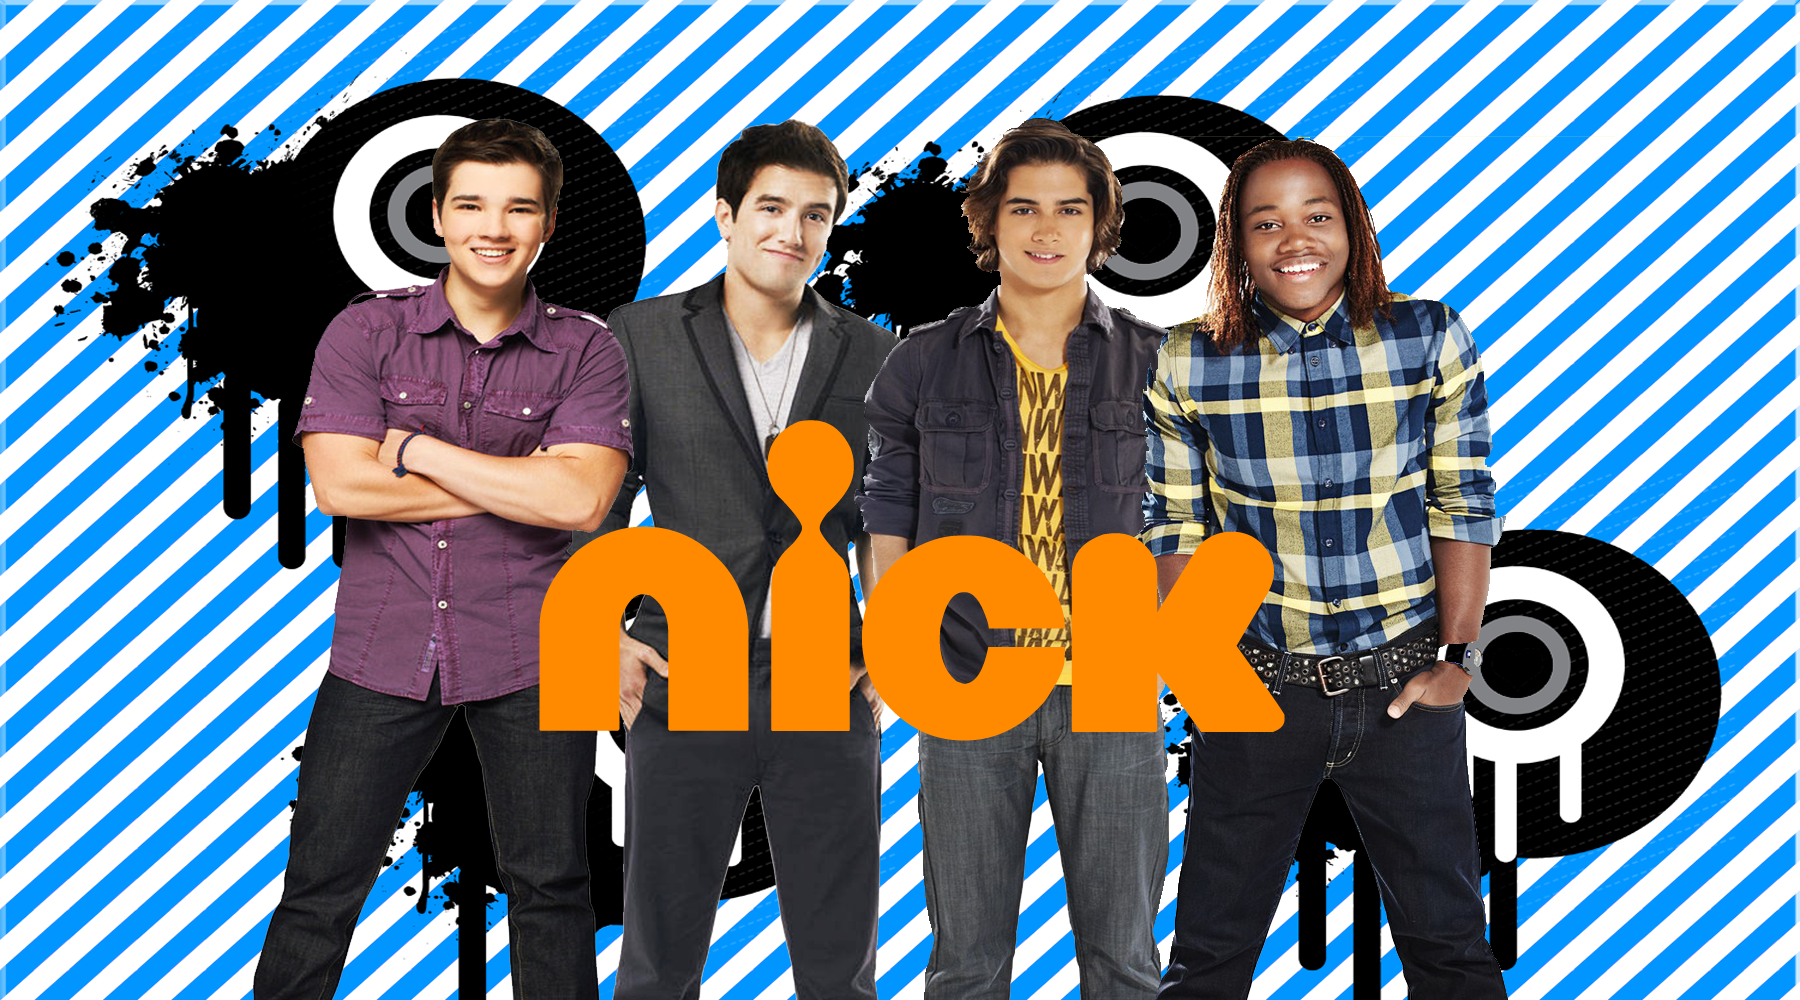 Wallpaper Boys Nickelodeon By Abnereditions